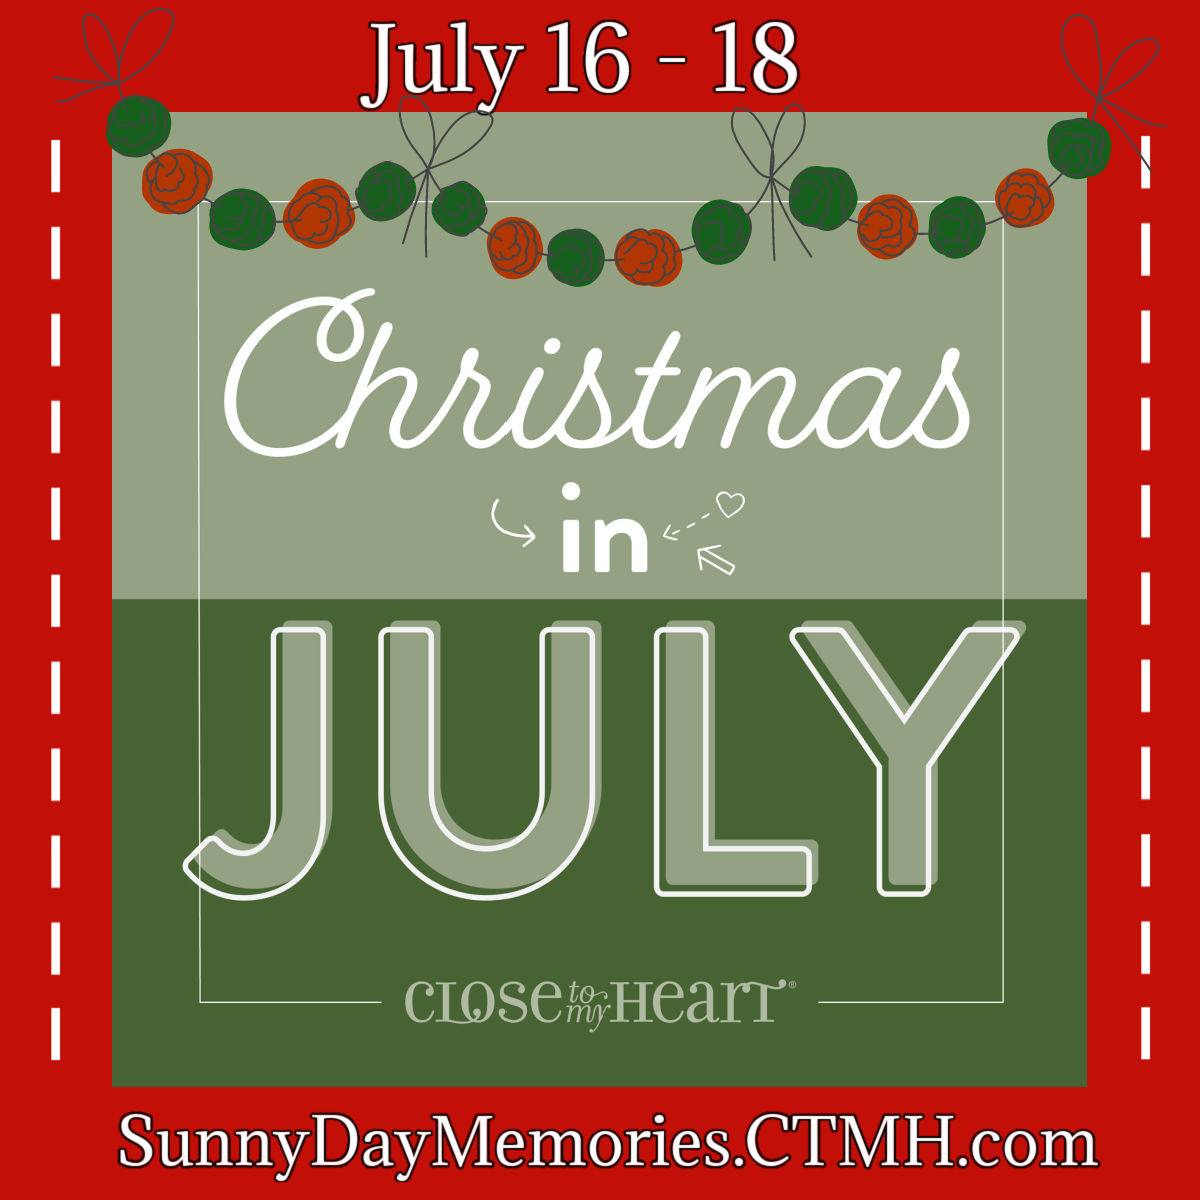 CTMH Christmas in July Sale